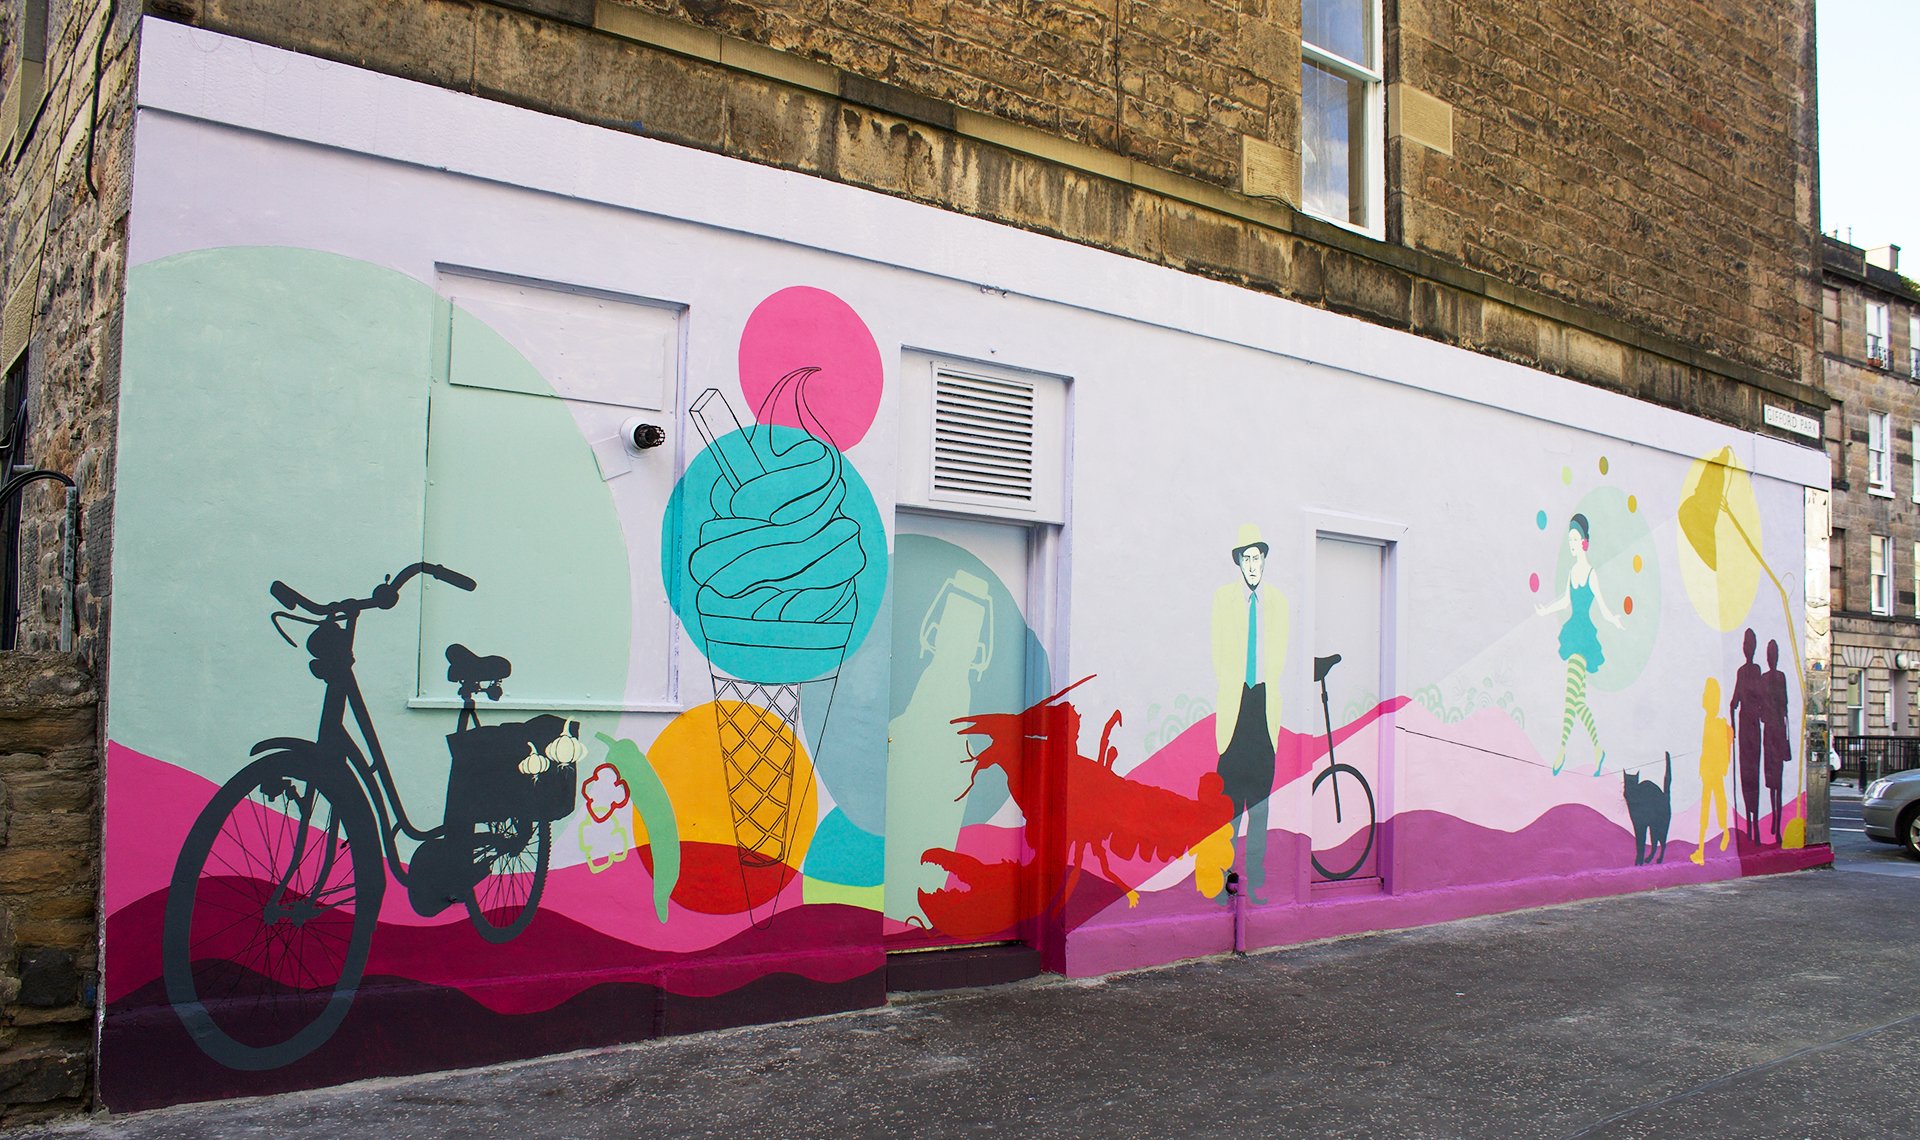 Gifford Park Mural in bright pinks and blues with artworks including ice-cream cone, a juggling tightrope walker and bicycle